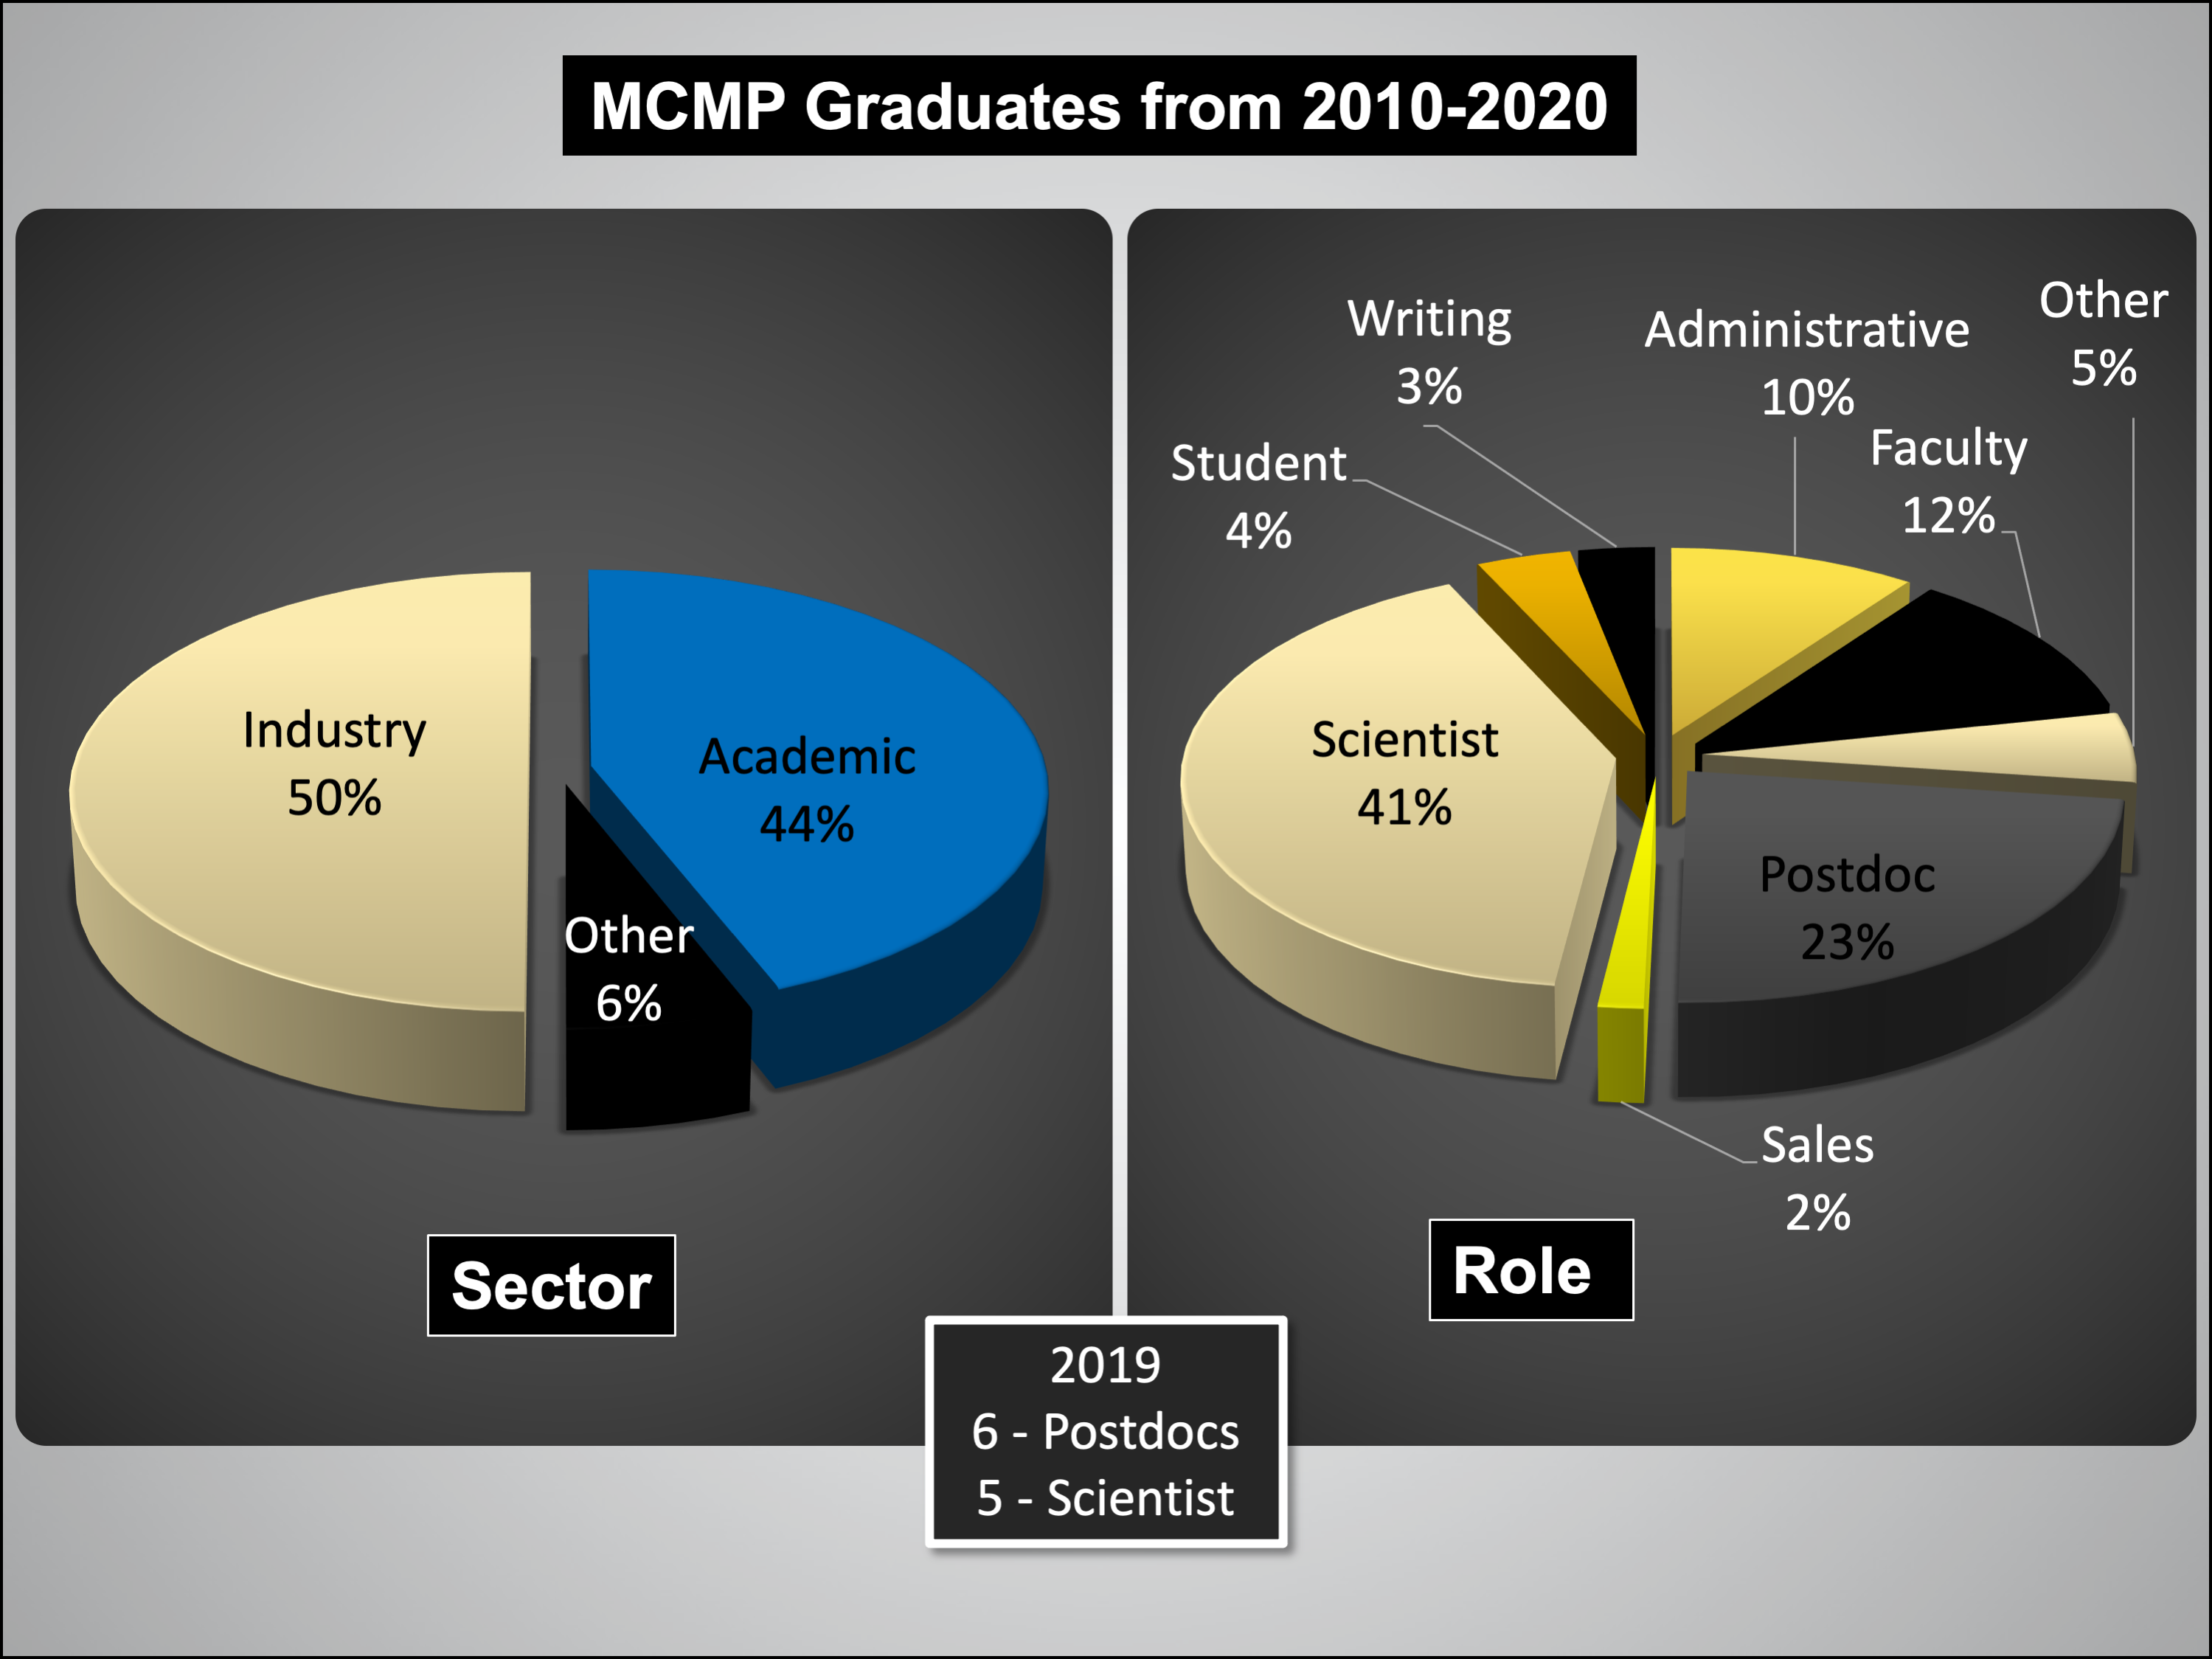 MCMP Graduates from 2010-2020